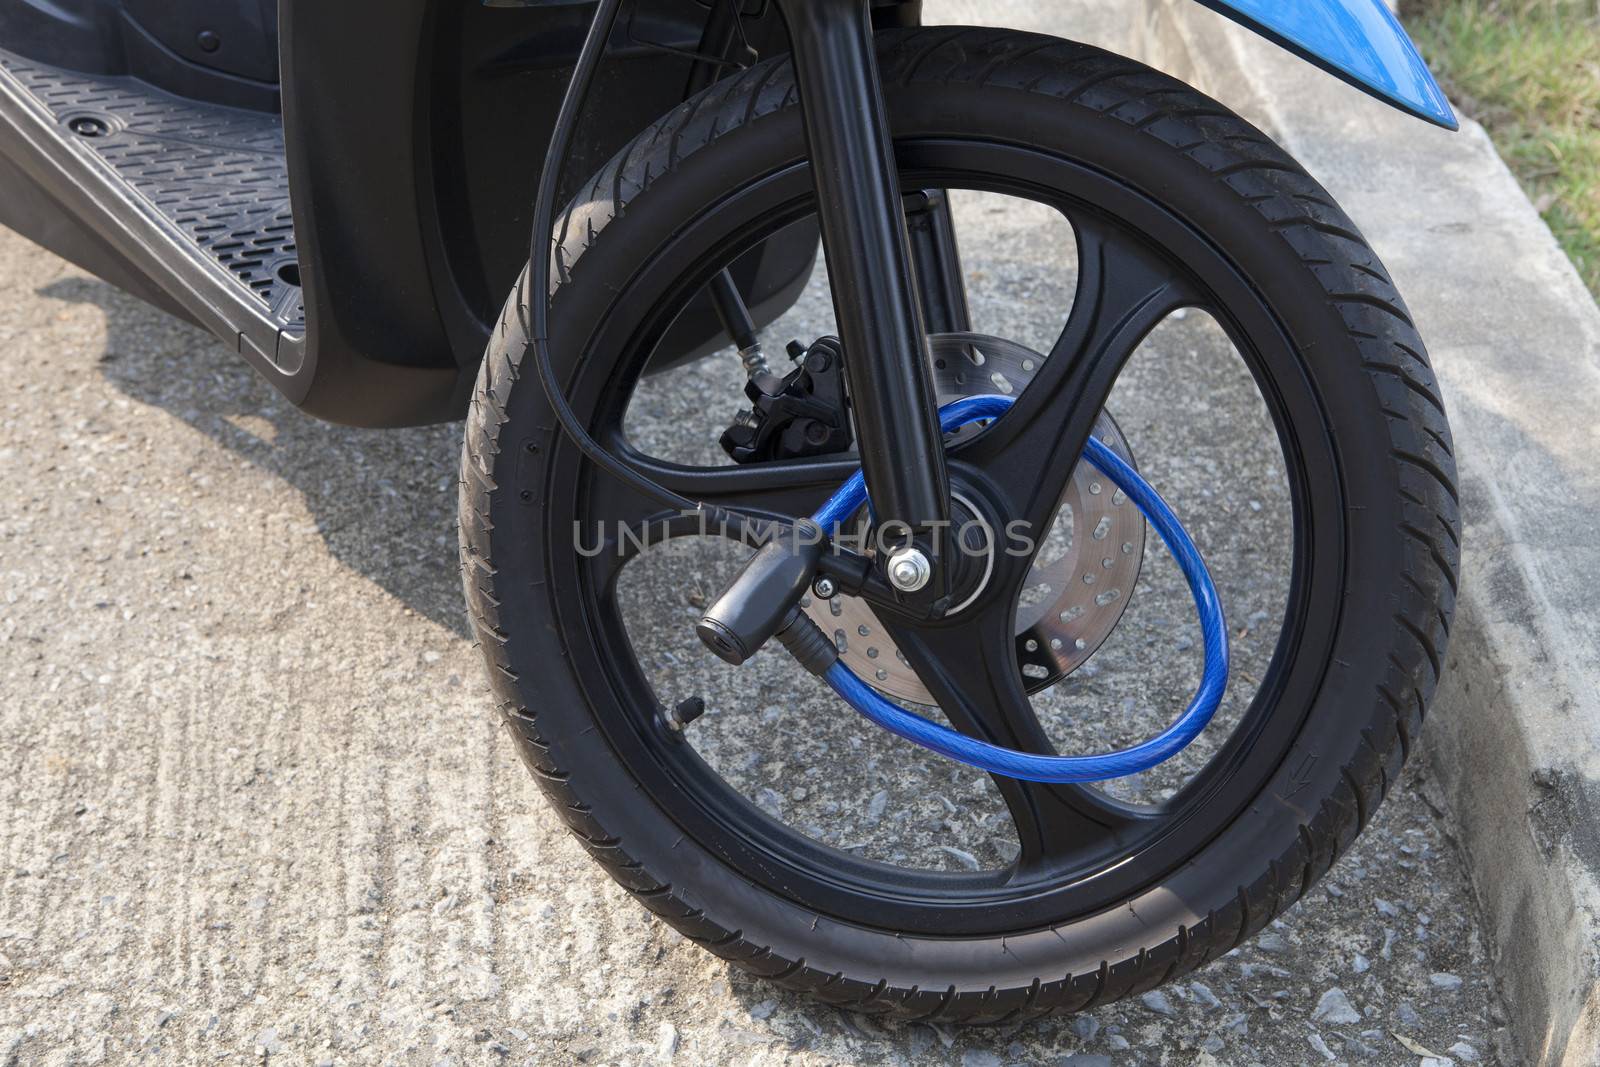 portable lock on front wheel motocycle protect from burglary